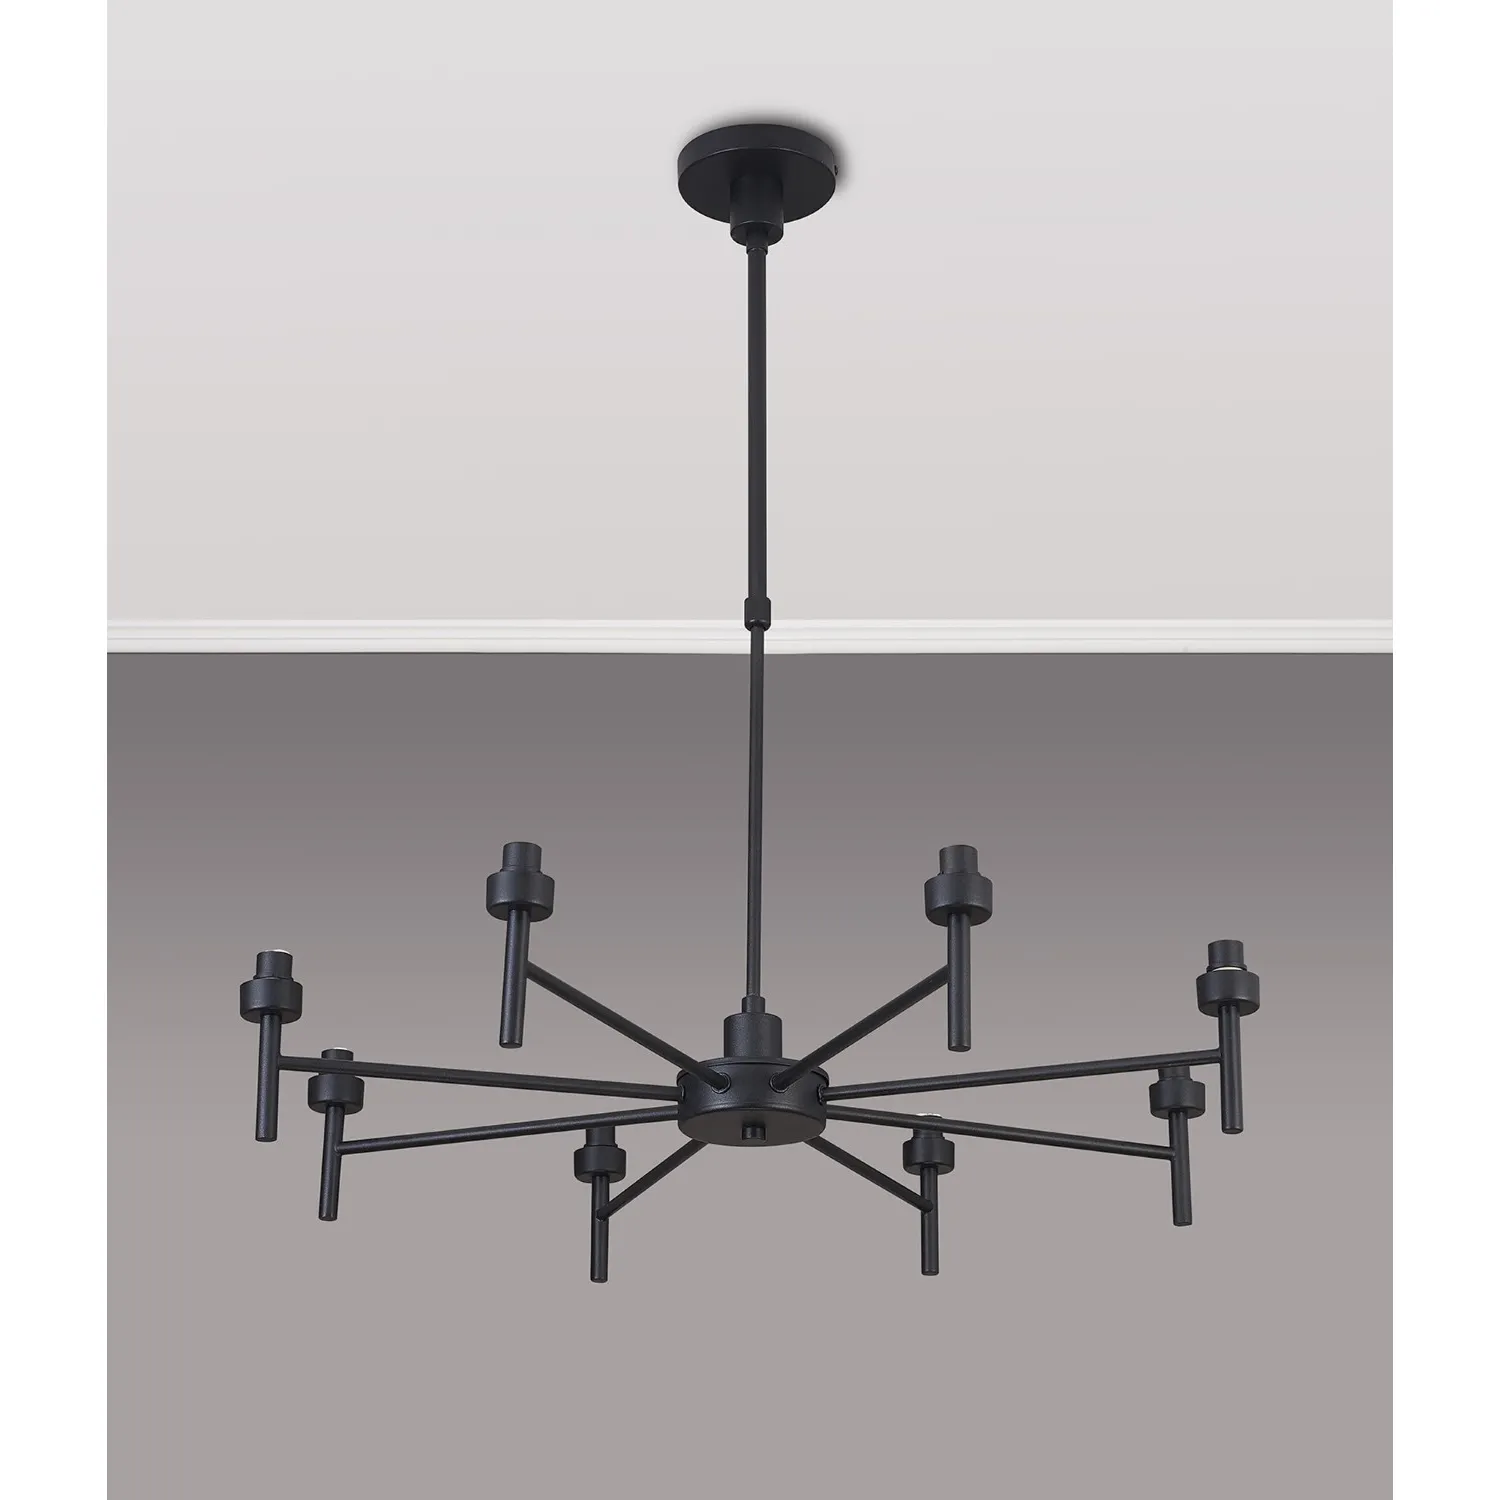 Abingdon Satin Black 8 Light G9 Universal Telescopic Light, Suitable For A Vast Selection Of Glass Shades